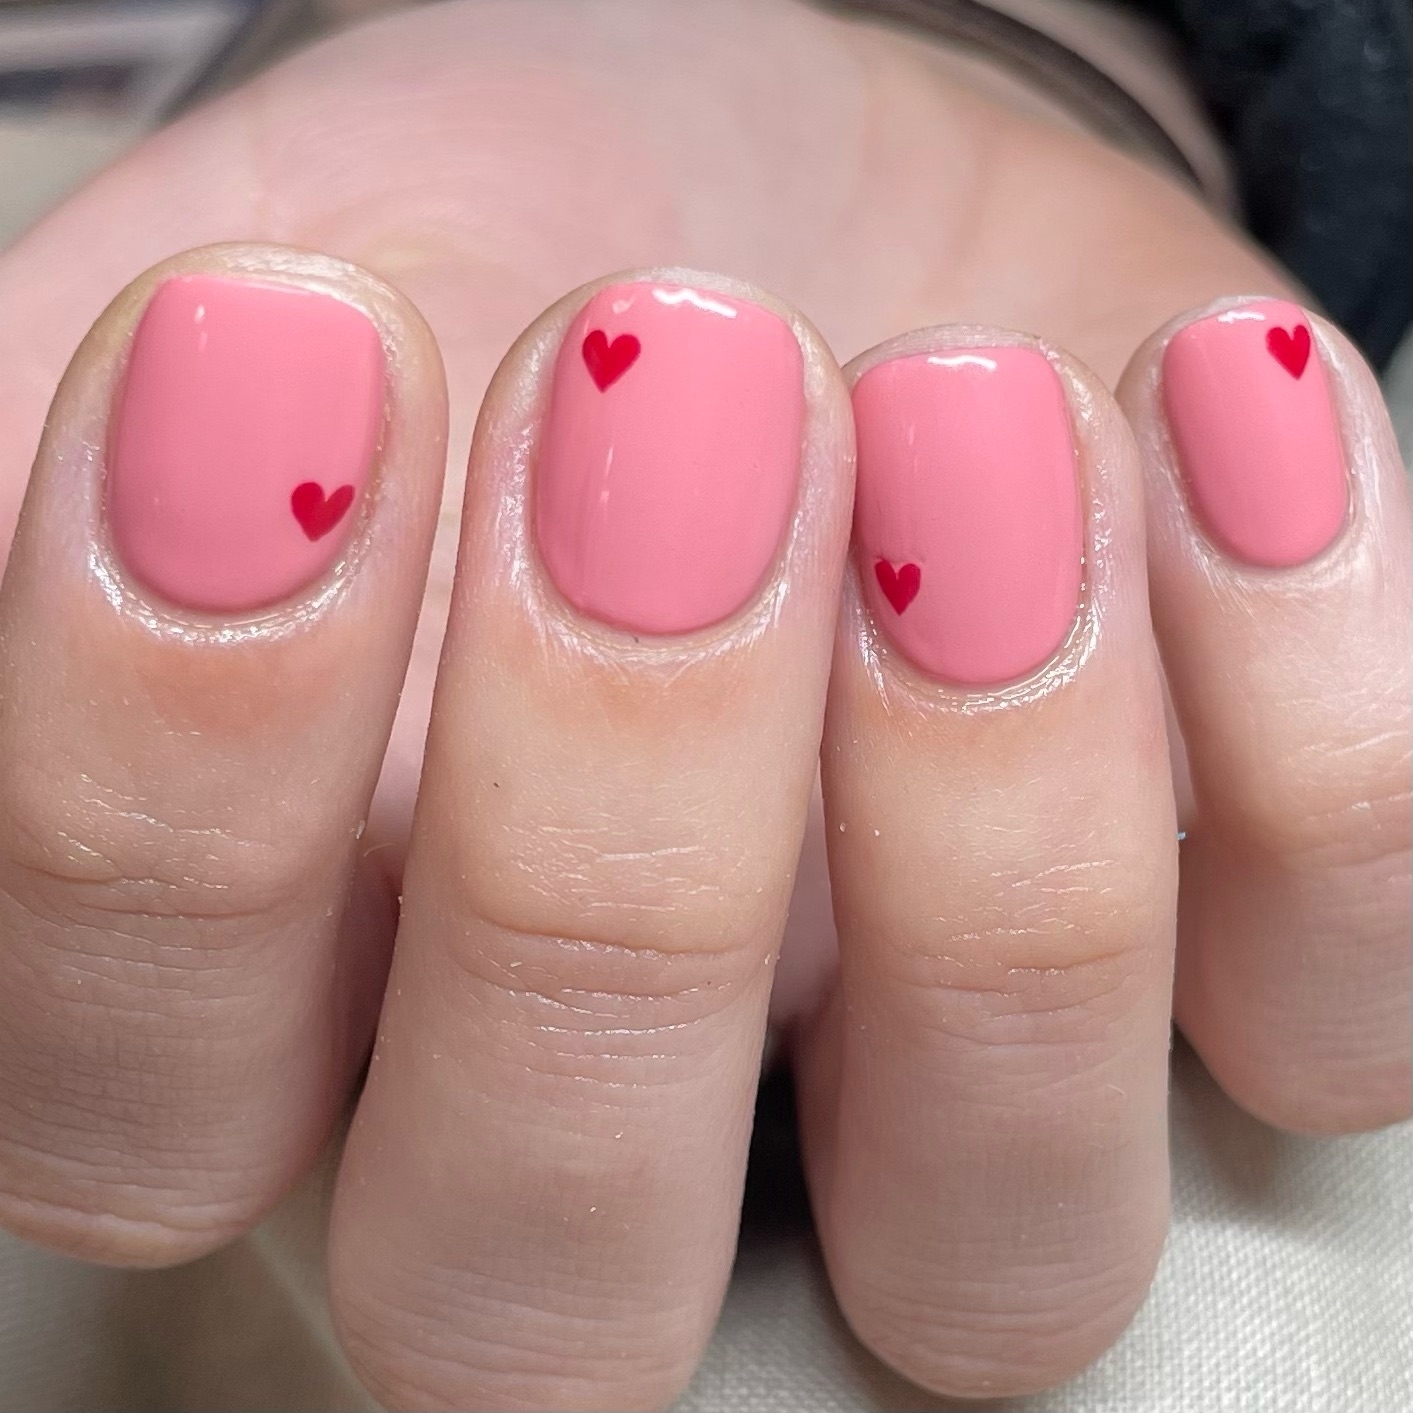 19 Barbie-Inspired Nail Art Designs To Try This Summer | Evie Magazine